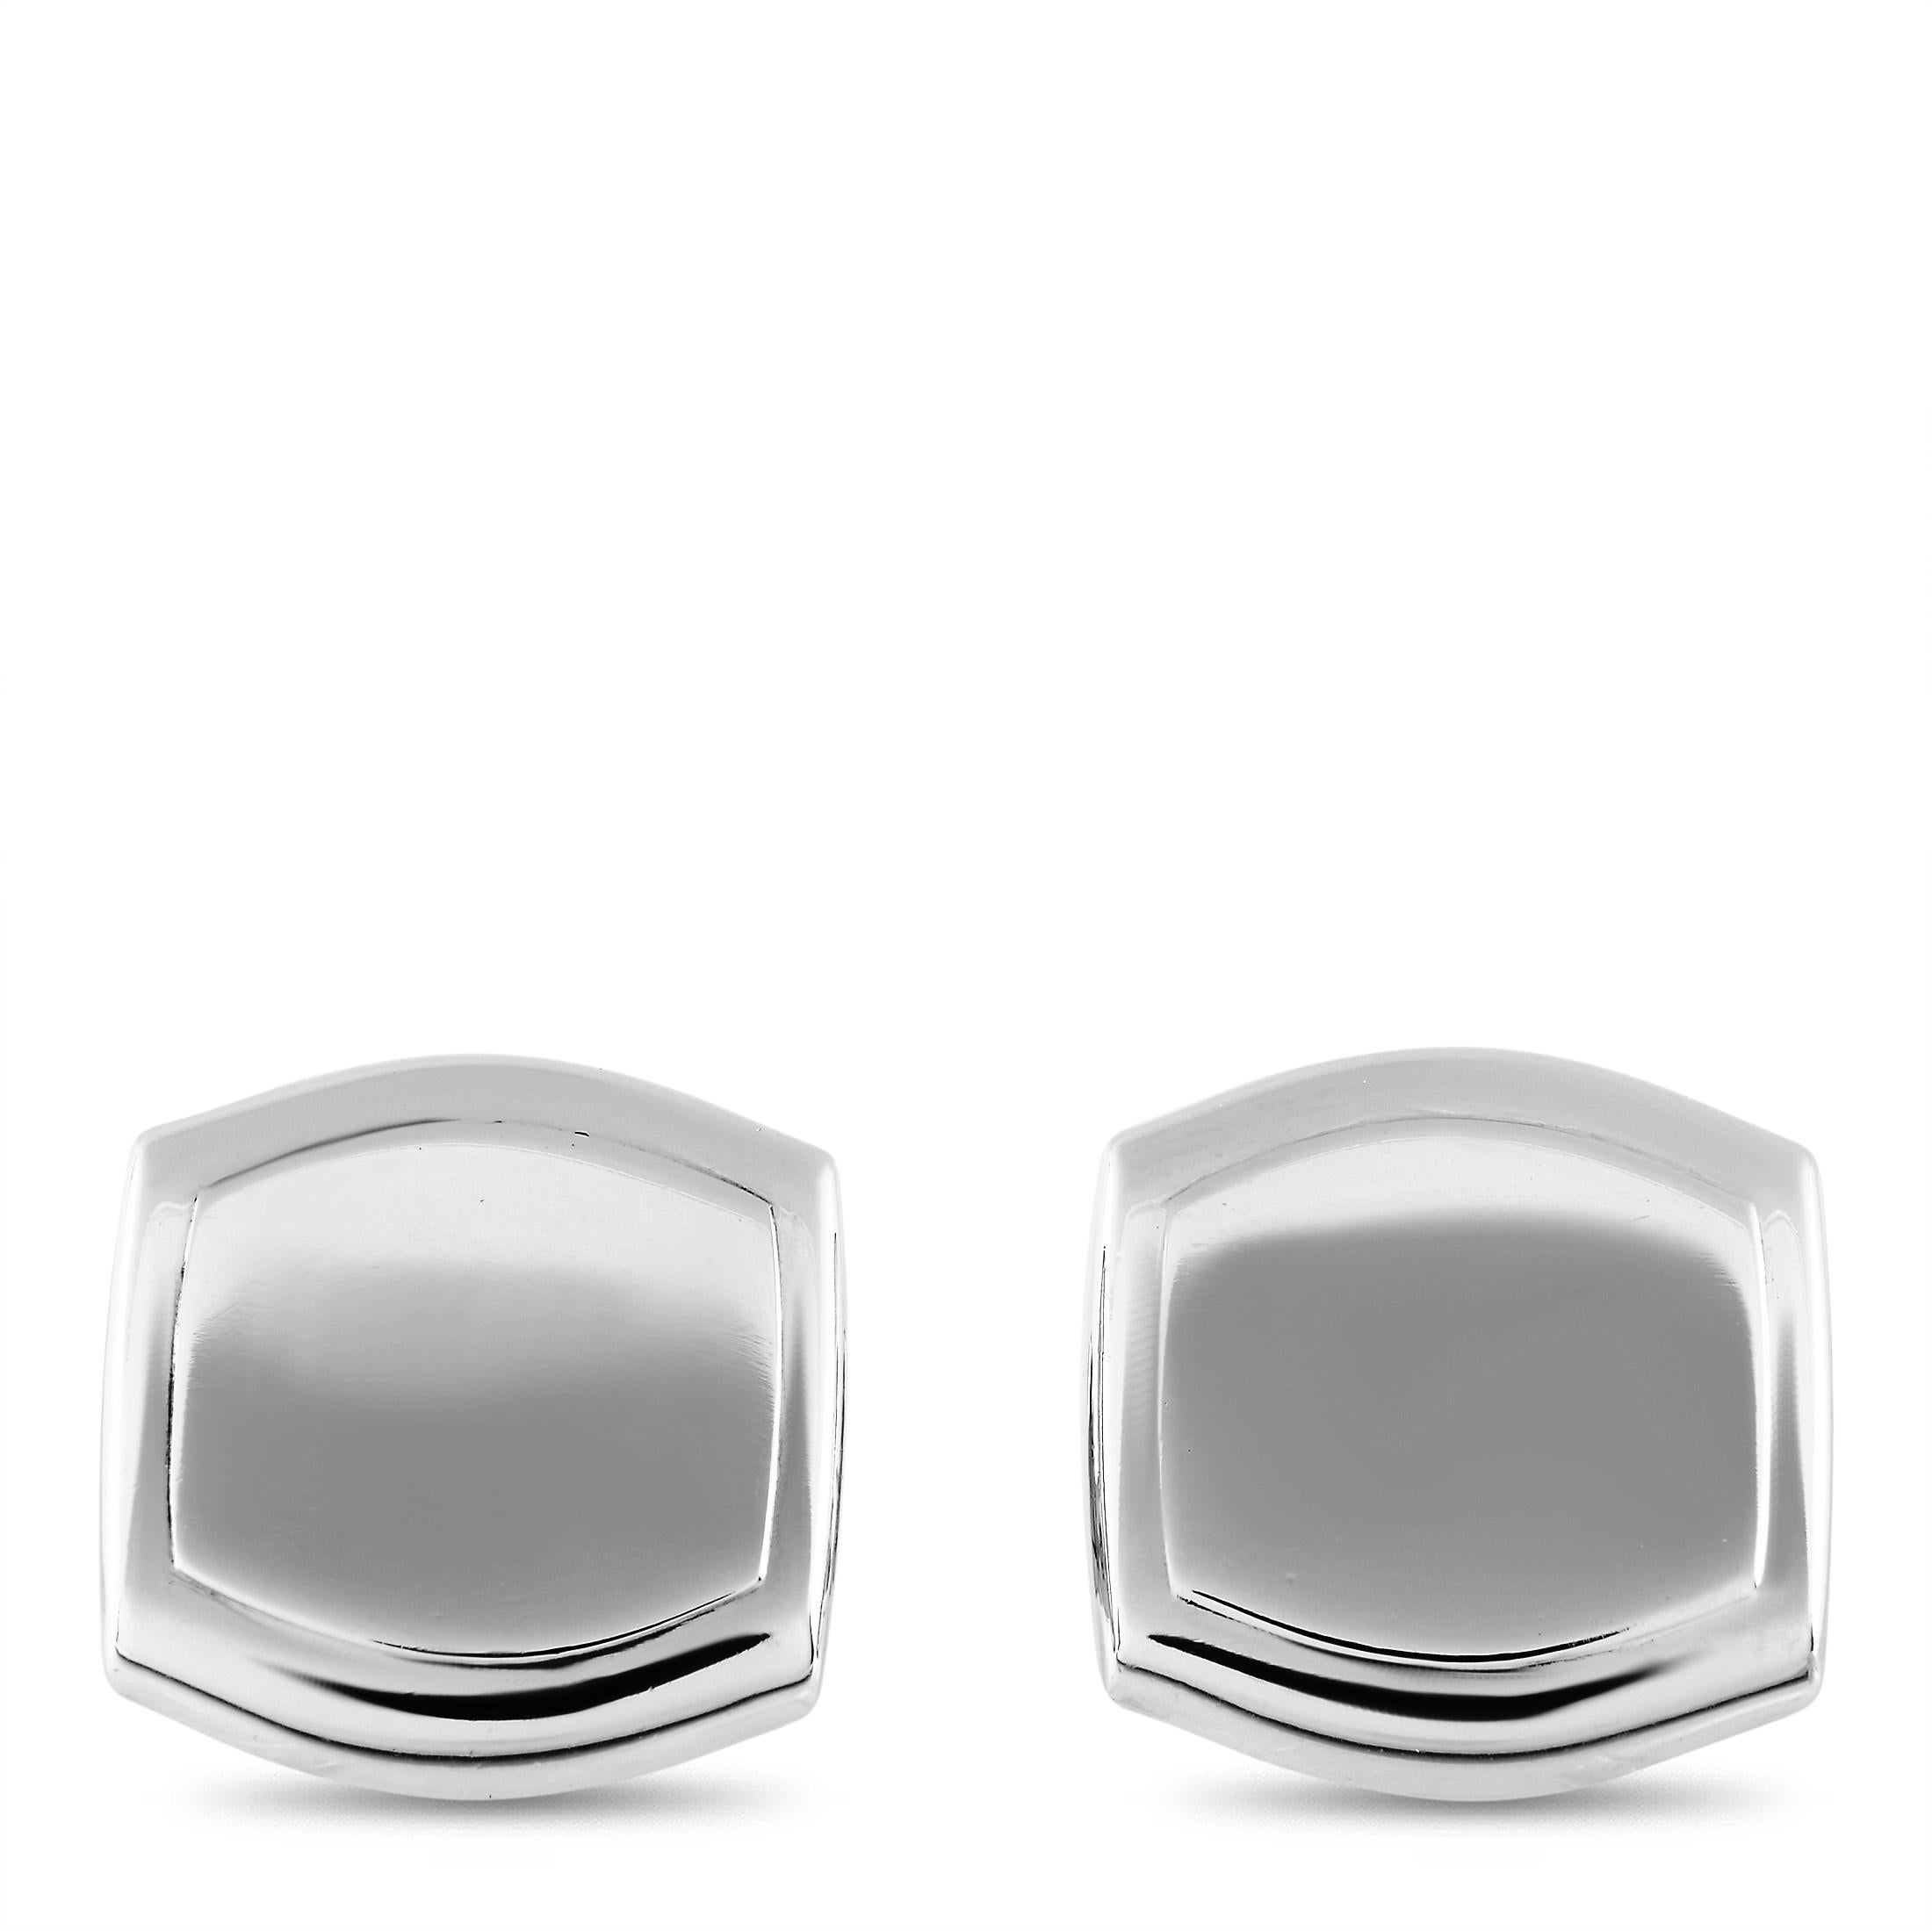 These Asprey cufflinks are crafted from 18K white gold and each of the two weighs 12.55 grams. The cufflinks measure 0.6” in length and 0.7” in width.

Offered in estate condition, this pair of cufflinks includes a gift box.